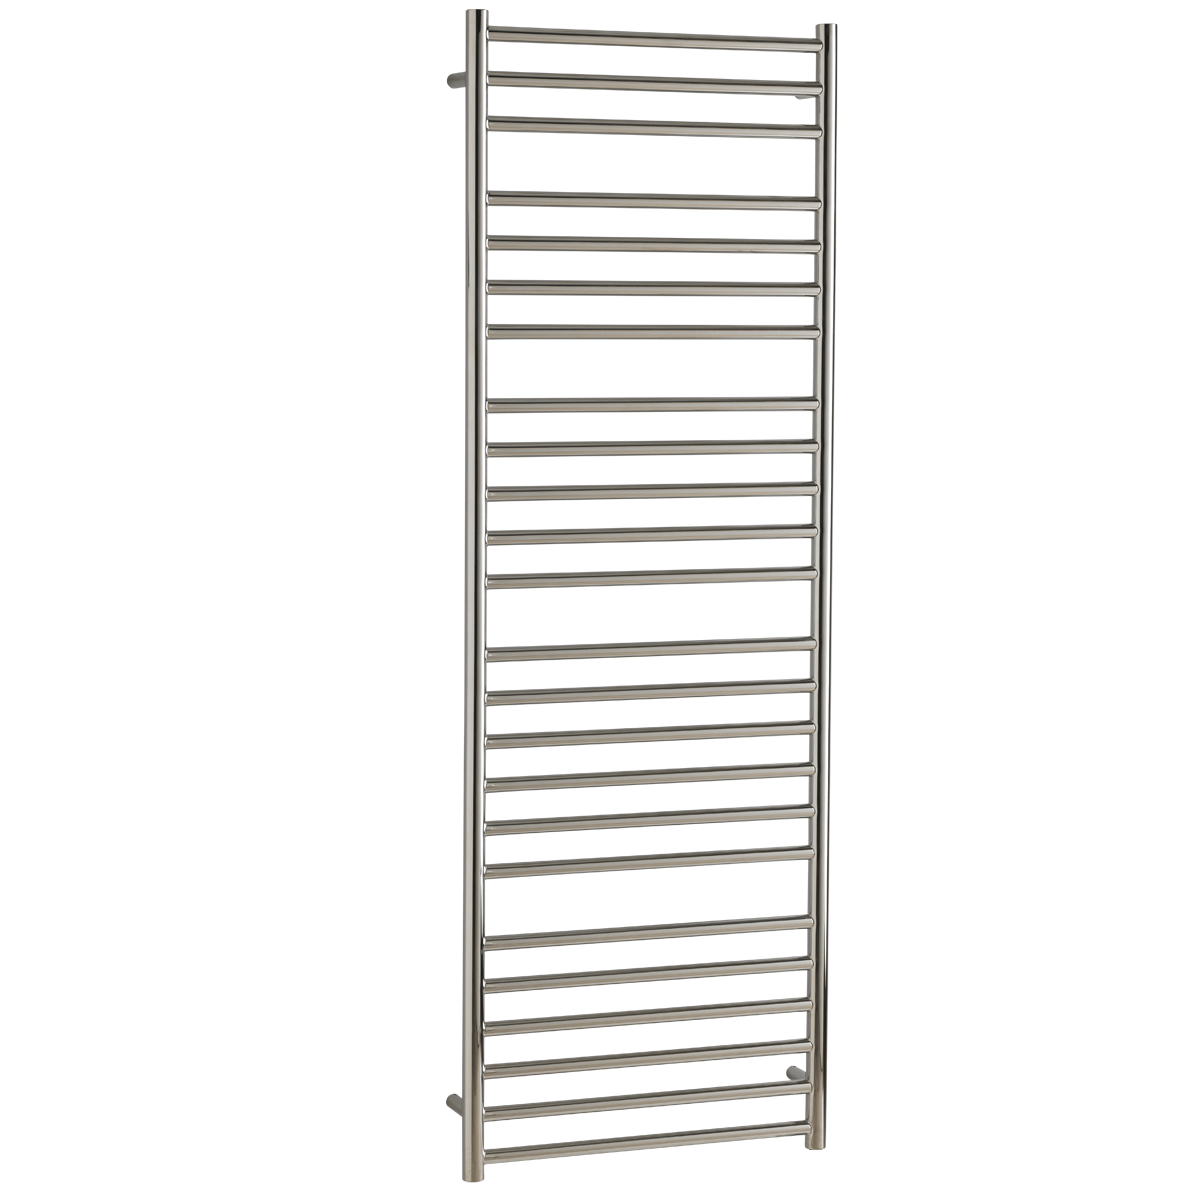 Aura Steel Stainless Steel Smart Electric Towel Rail with Thermostat, Timer + WiFi Control Efficient Heating, Well Made, Excellent Value Buy Online From Solaire Quartz UK Shop 13